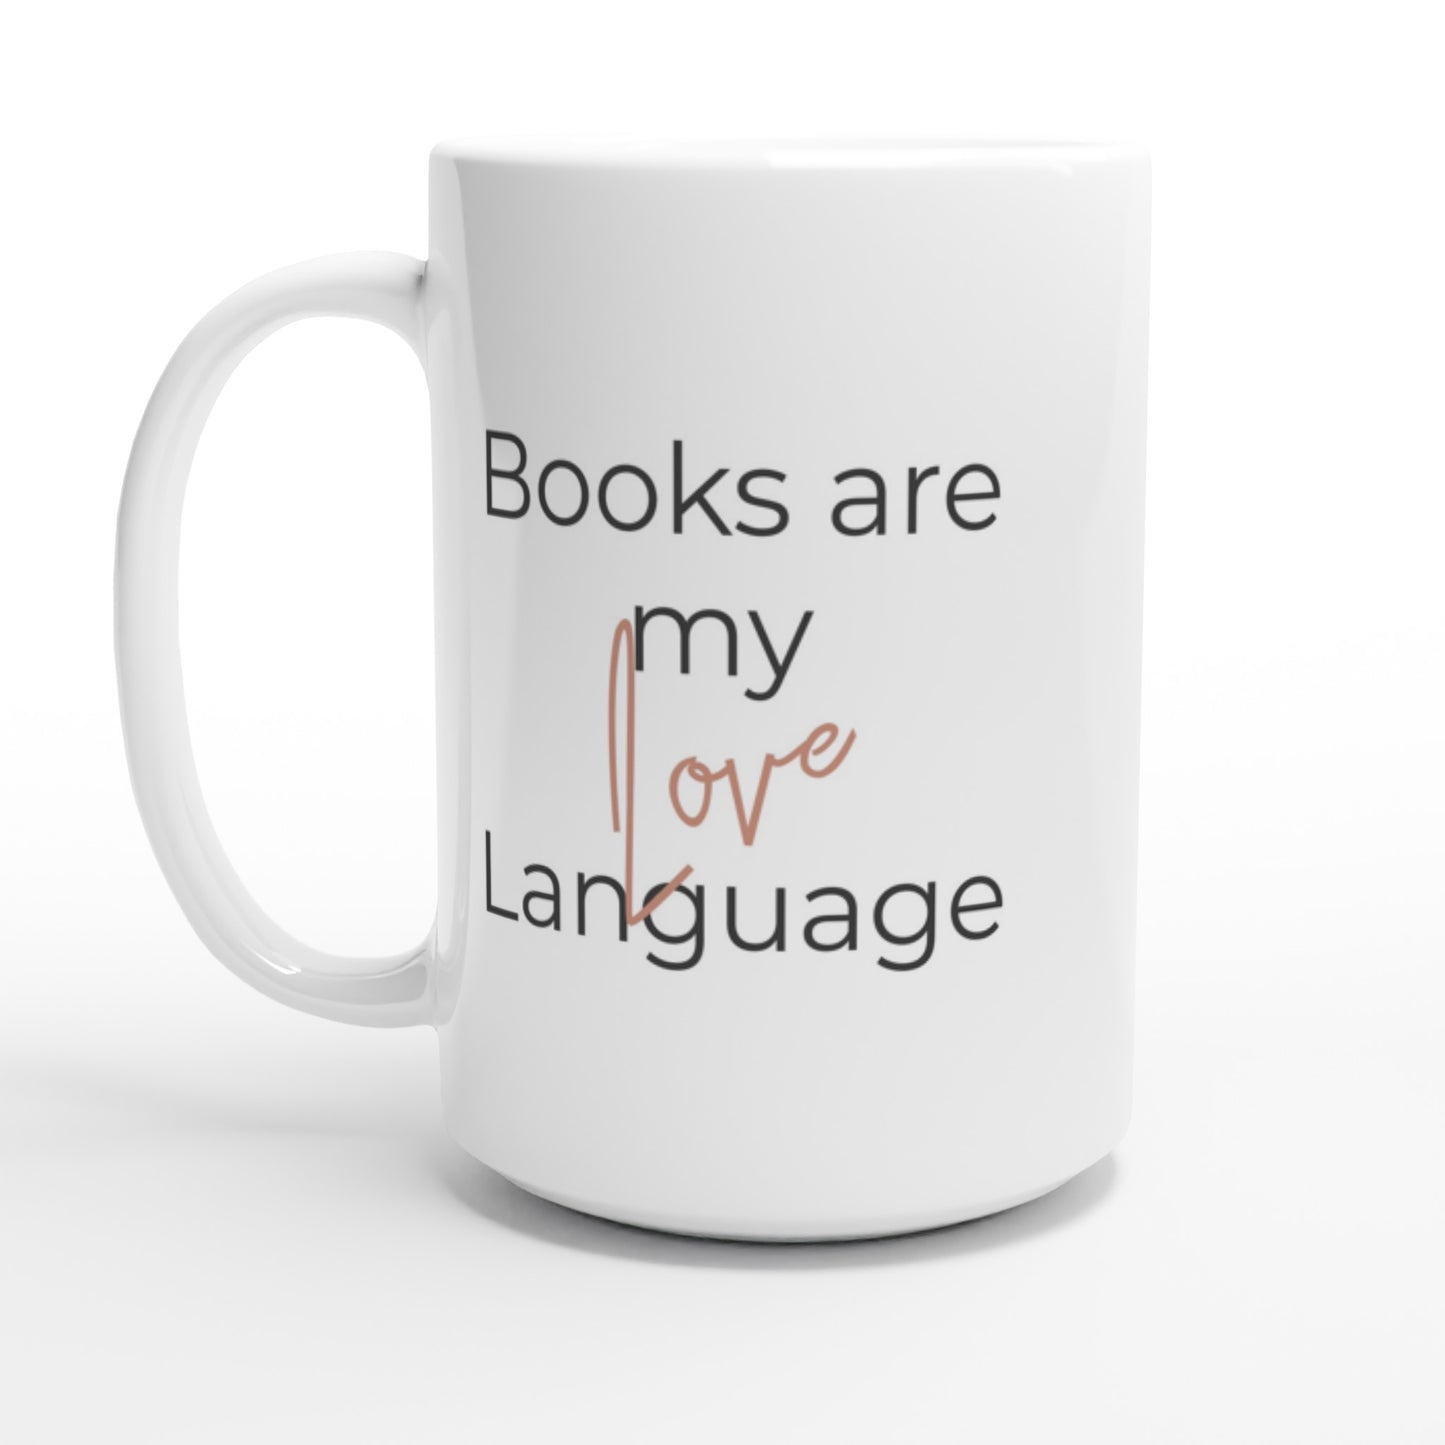 This Book-Related Coffee Mug is perfect for book lovers, as it is designed with the phrase "Books are my love language". It serves as a reading companion for those who enjoy curling up with a.